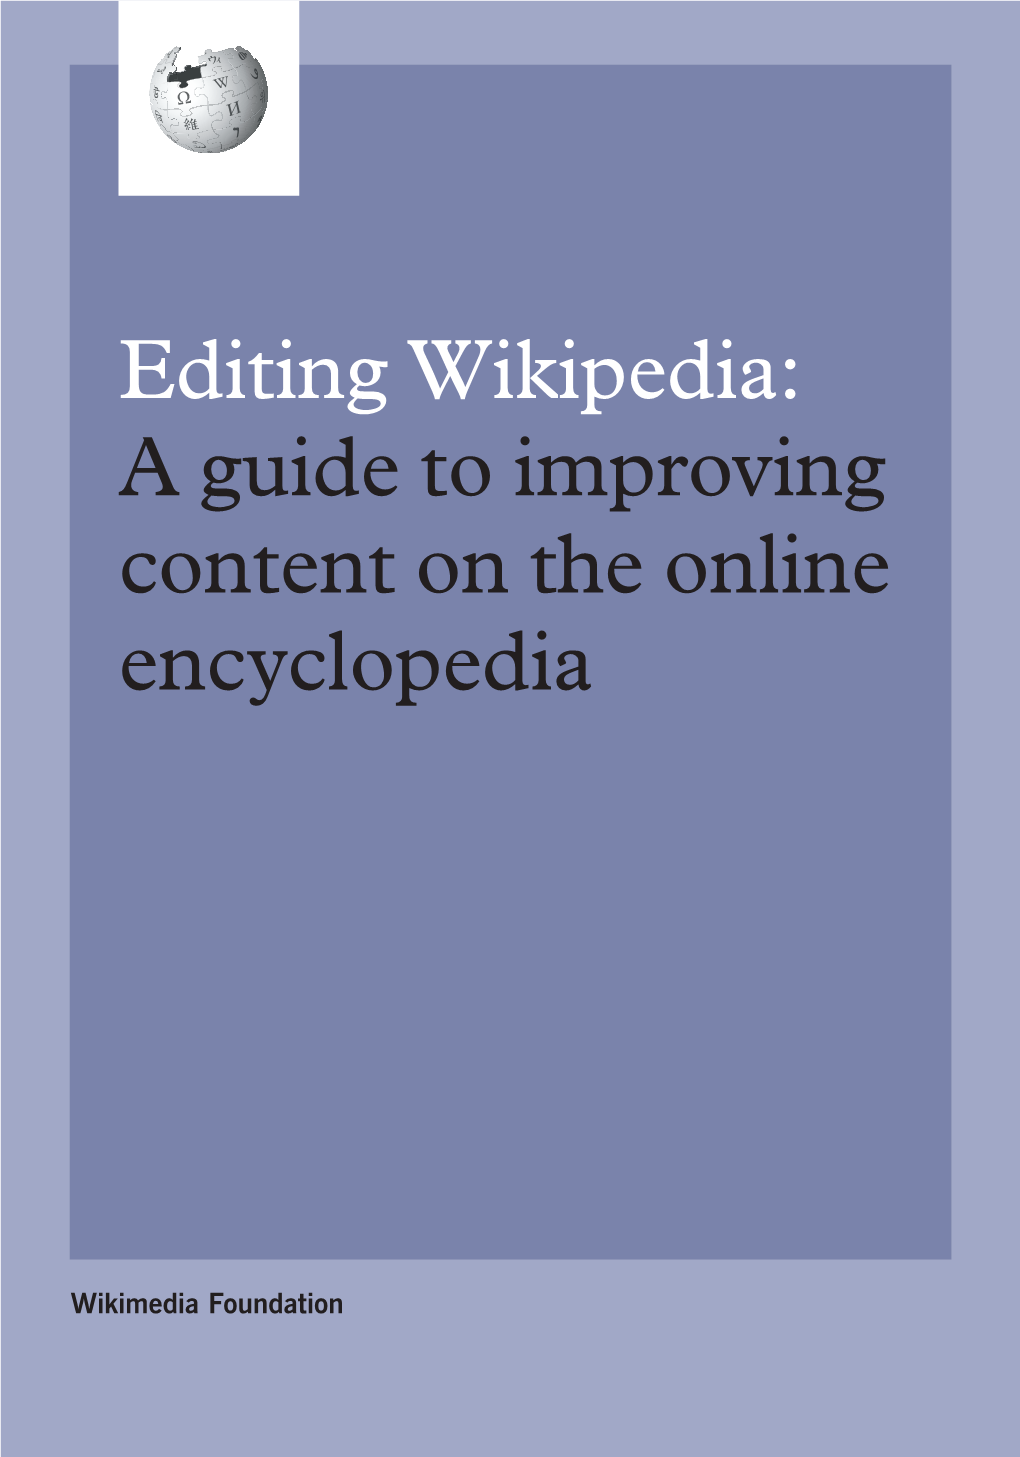 Editing Wikipedia: a Guide to Improving Content on the Online Encyclopedia